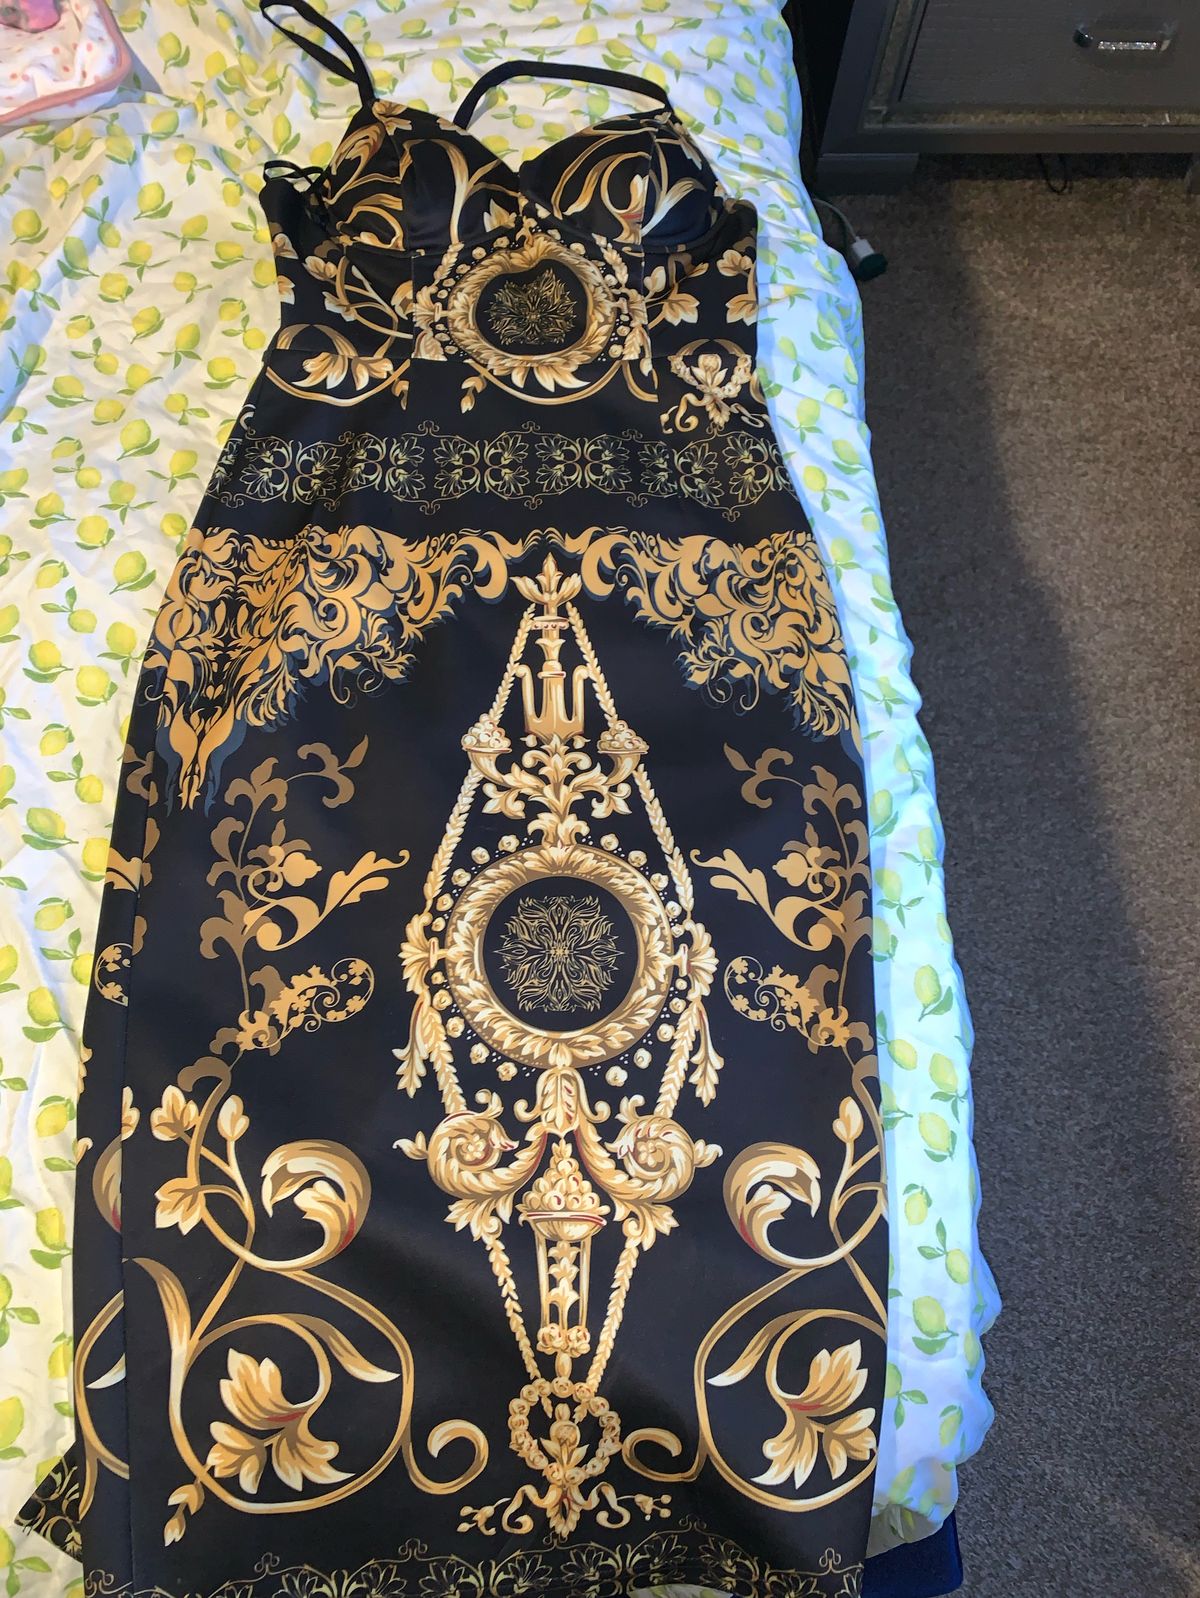 Size 4 Yellow Floor Length Maxi on Queenly